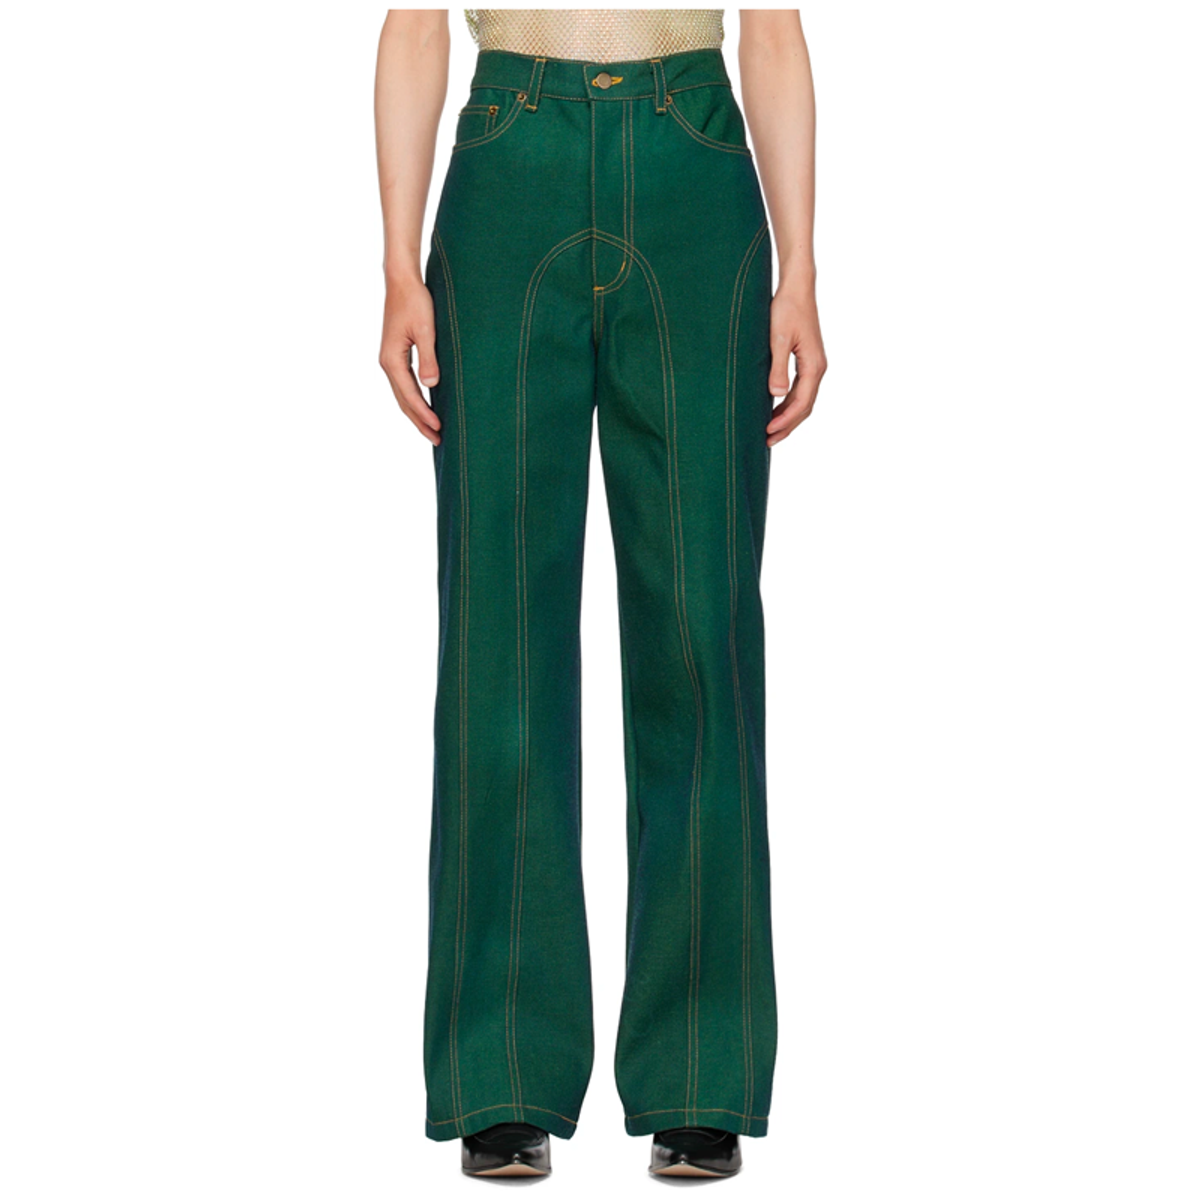 SSENSE Exclusive Green Jeans